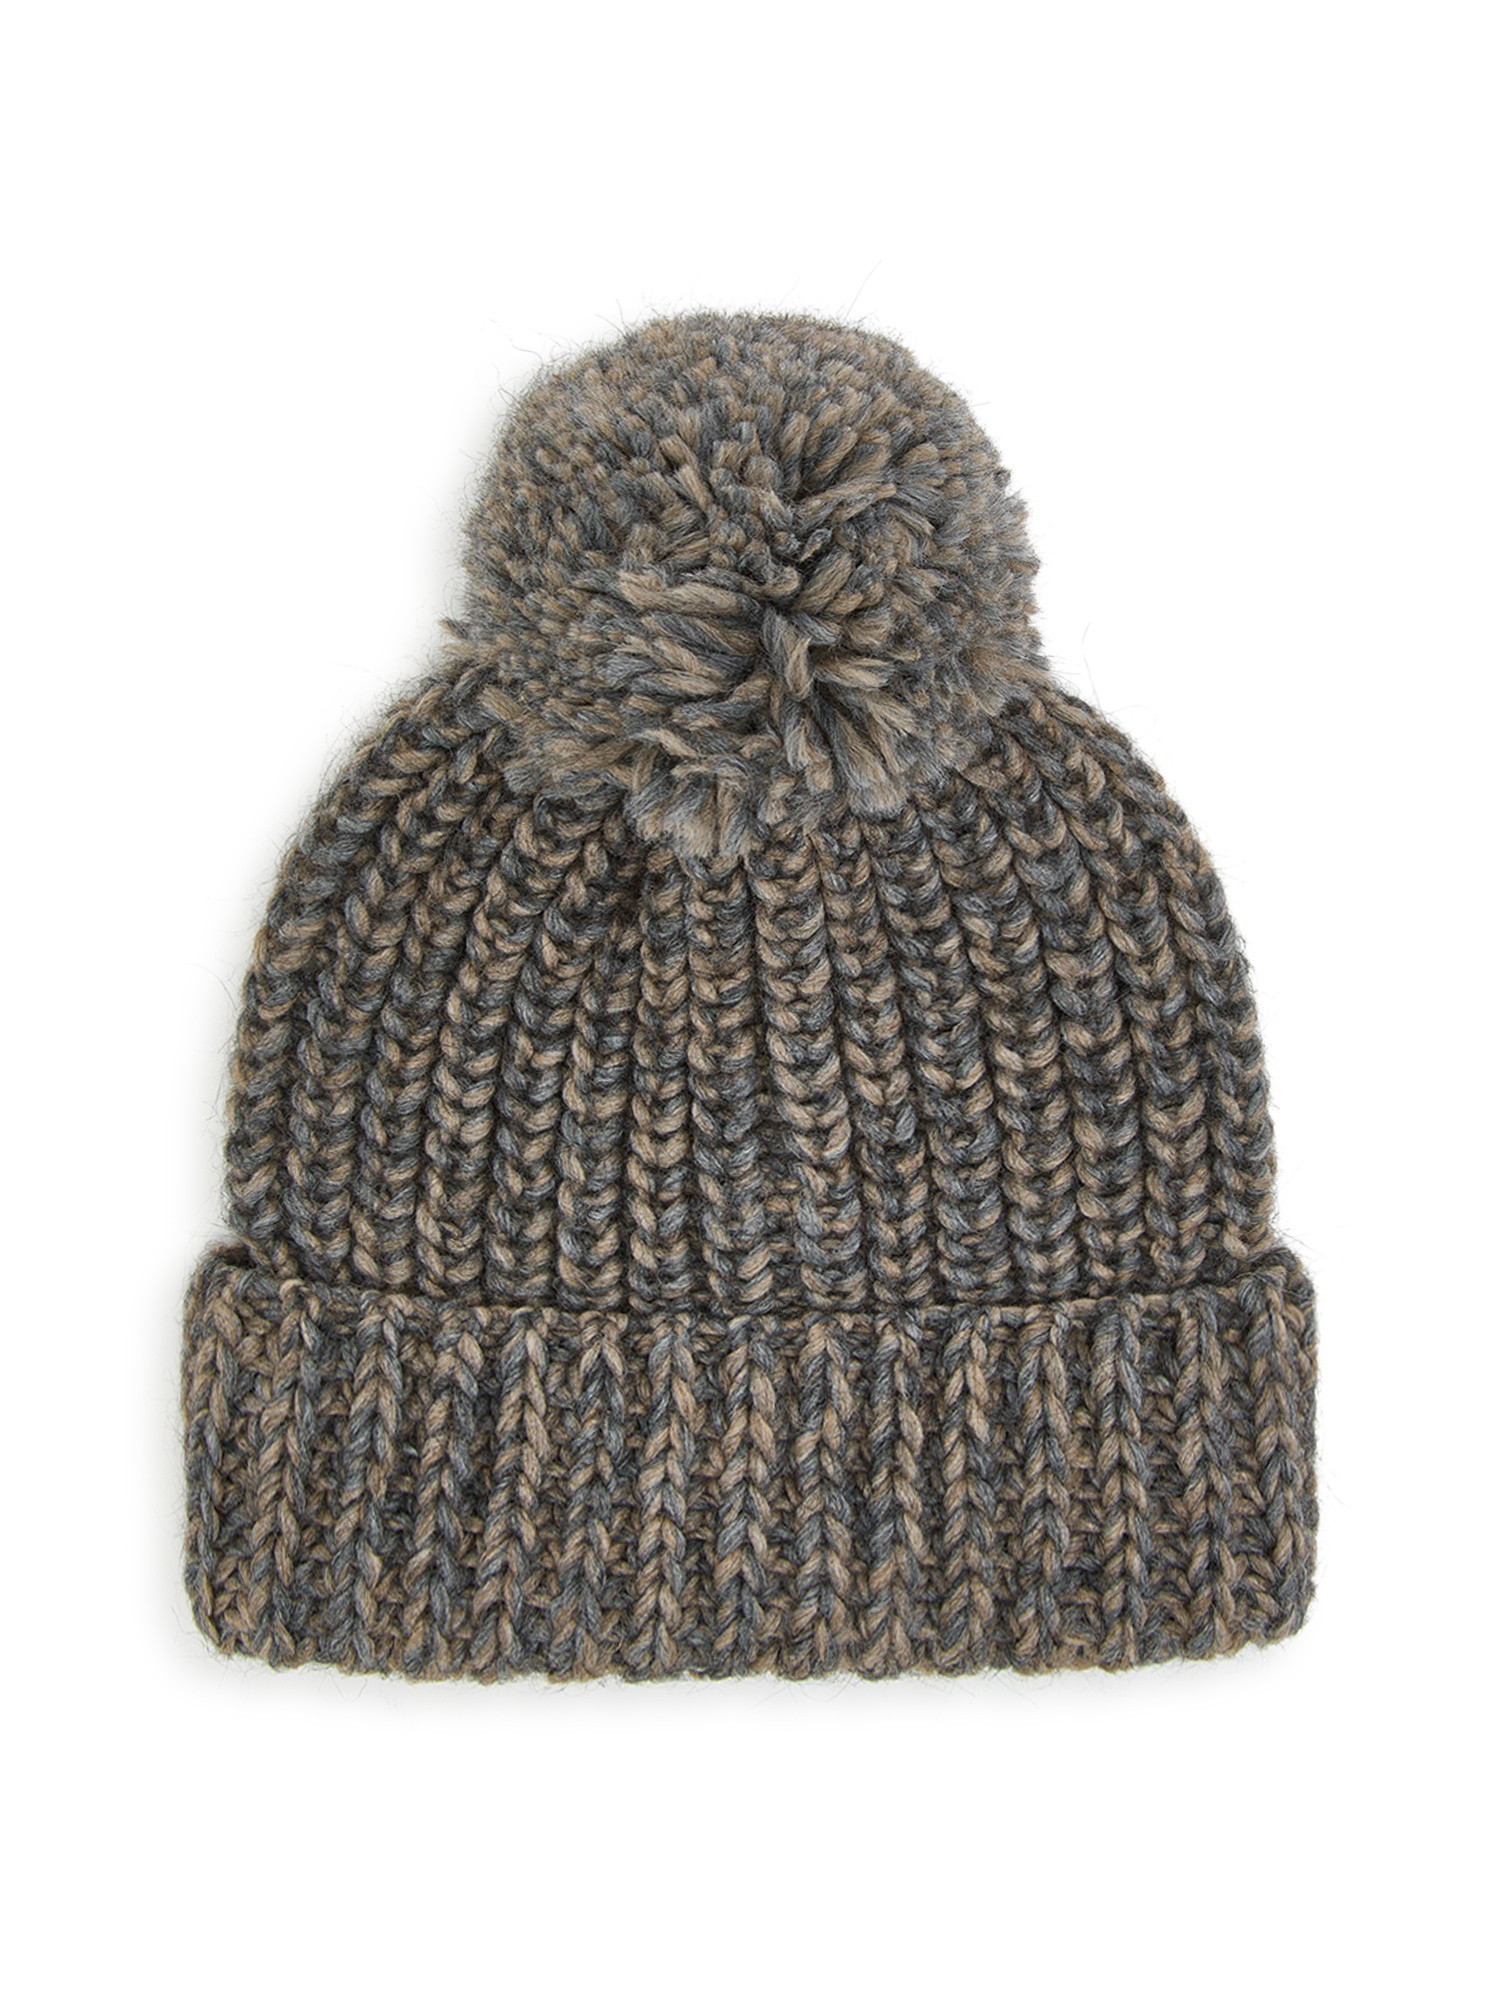 Luca D'Altieri - Beanie with pompon, Taupe Grey, large image number 0